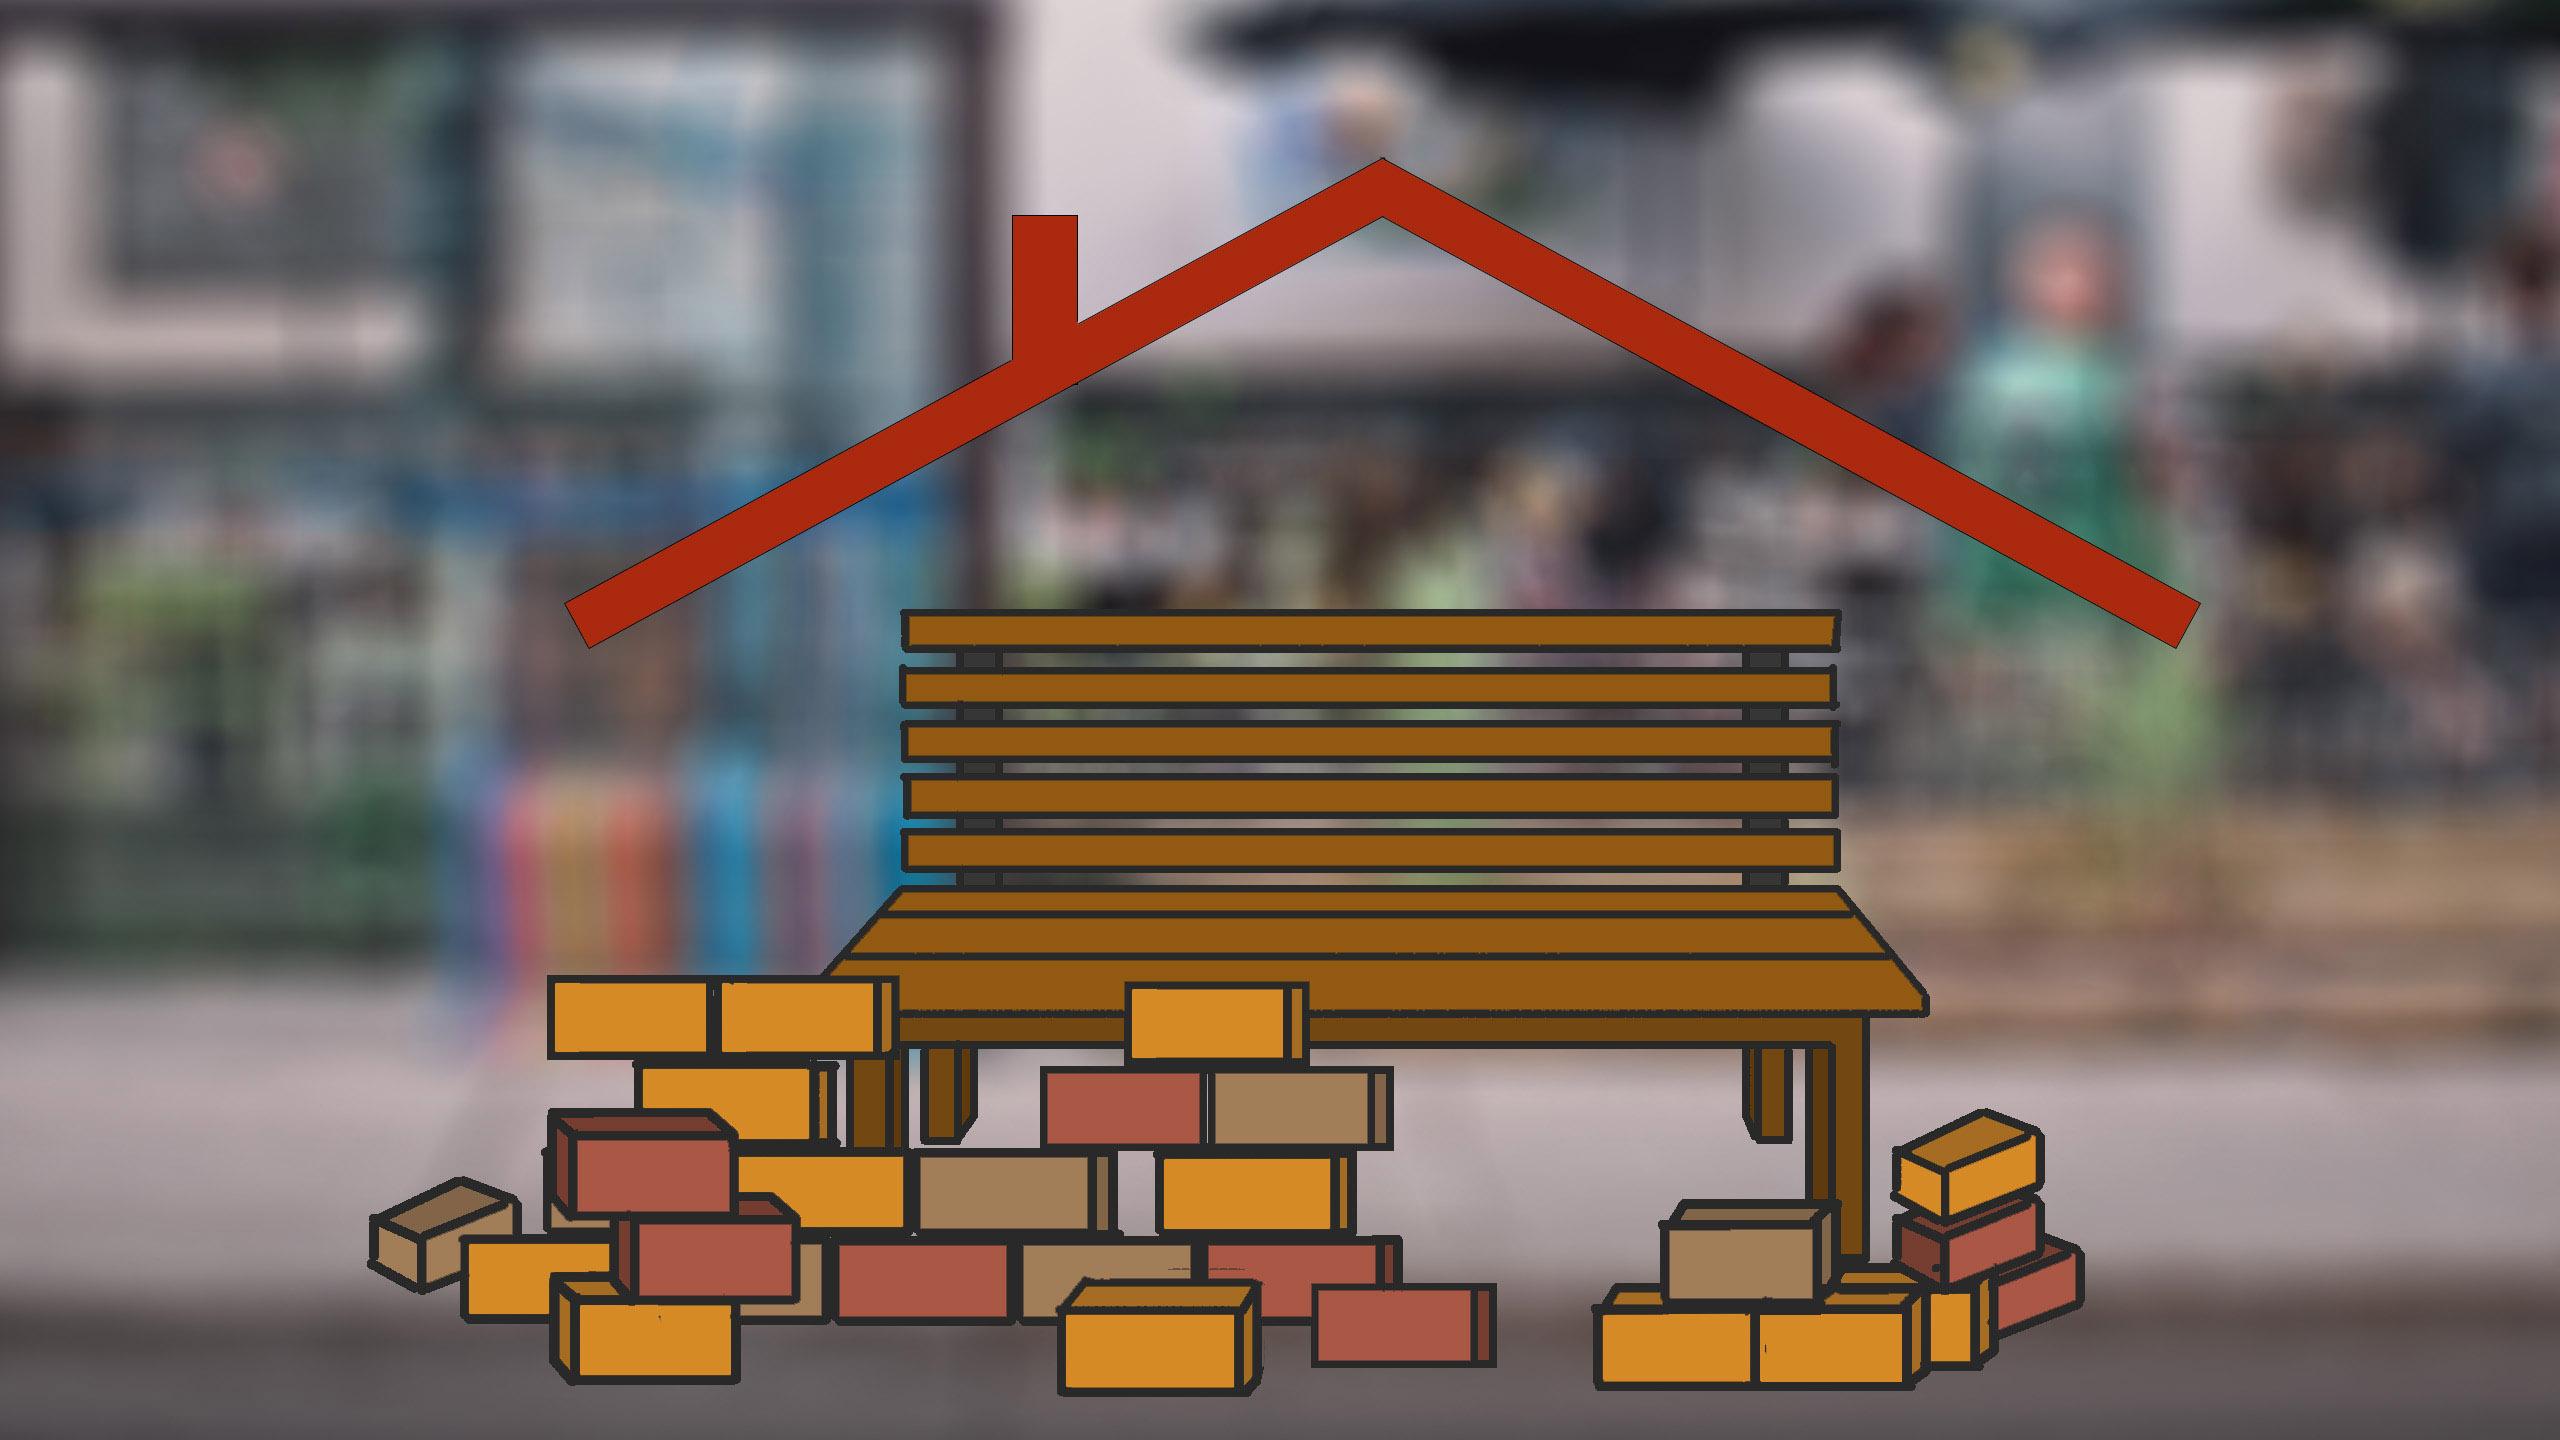 Illustration of a bench with bricks being laid around it. A roof hovers above the bench.